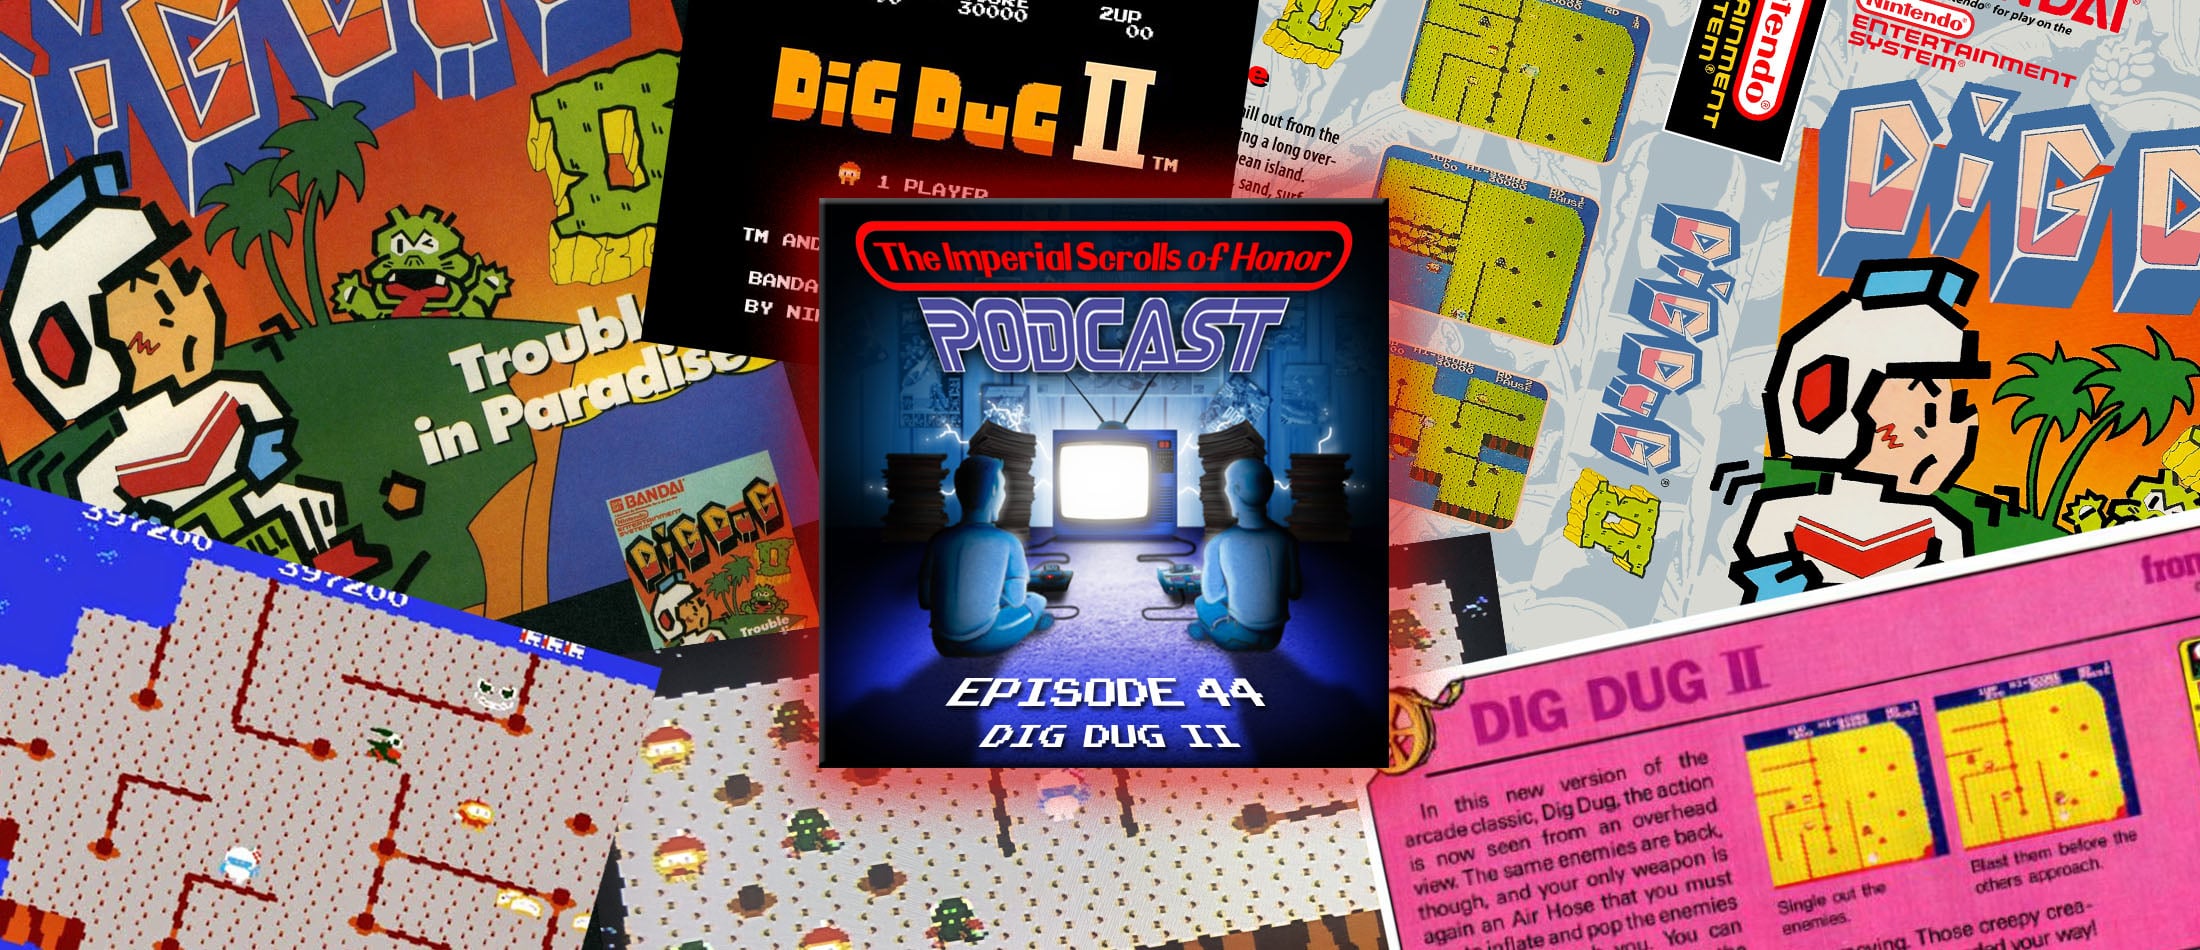 The Imperial Scrolls of Honor Podcast - Ep 44 - Dig Dug II (NES)